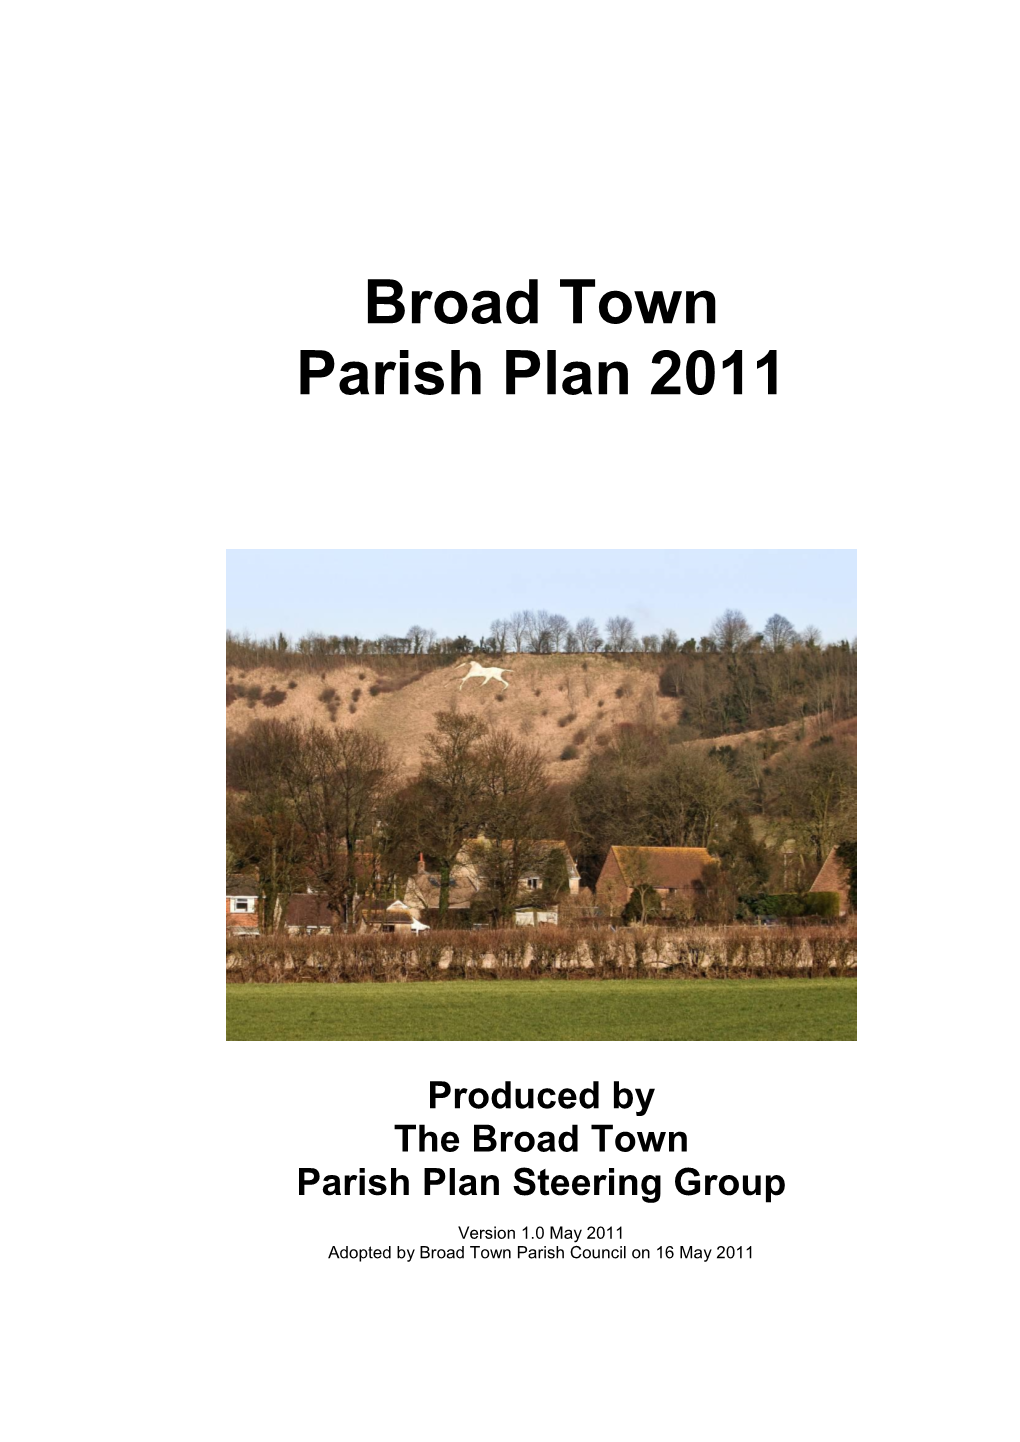 Broad Town Village Appraisal Report and References 11 June 2007